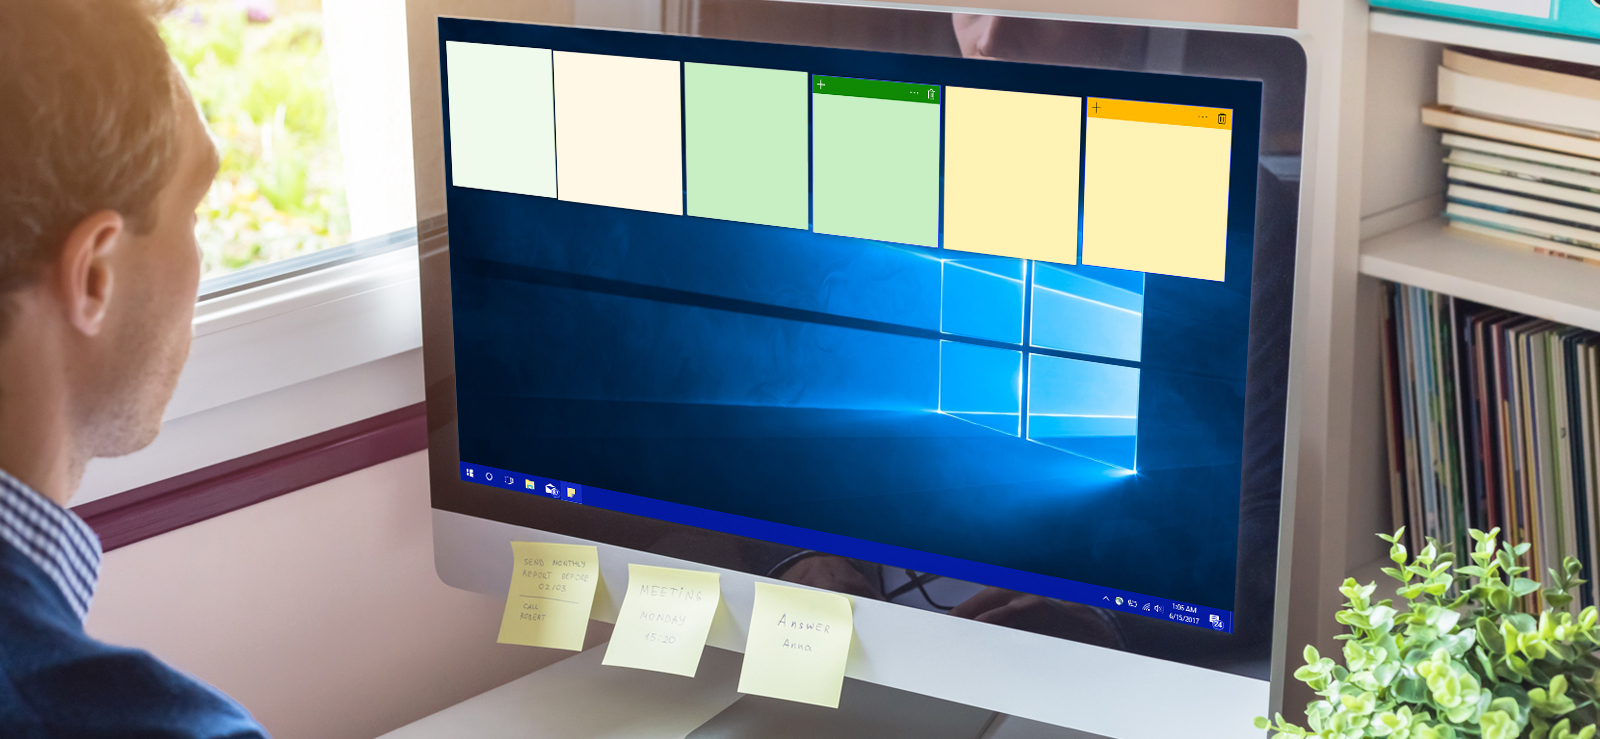 Tips To Recover Sticky Notes In Windows 10